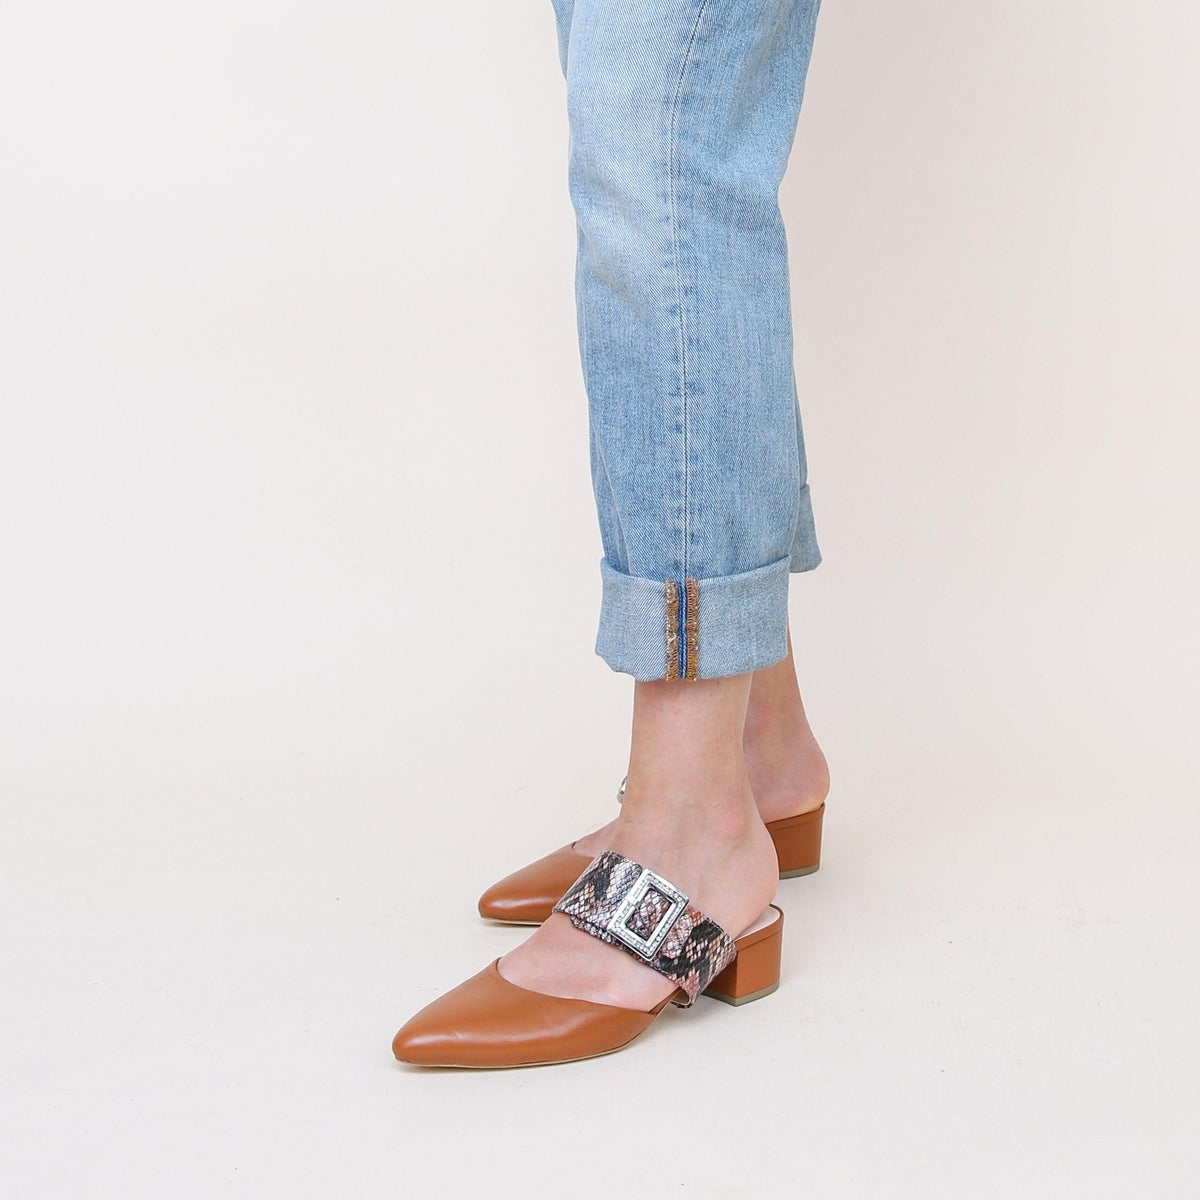 Grace in Rosy Boa Custom Shoe Straps | Alterre Make A Shoe - Sustainable Shoes & Ethical Footwear